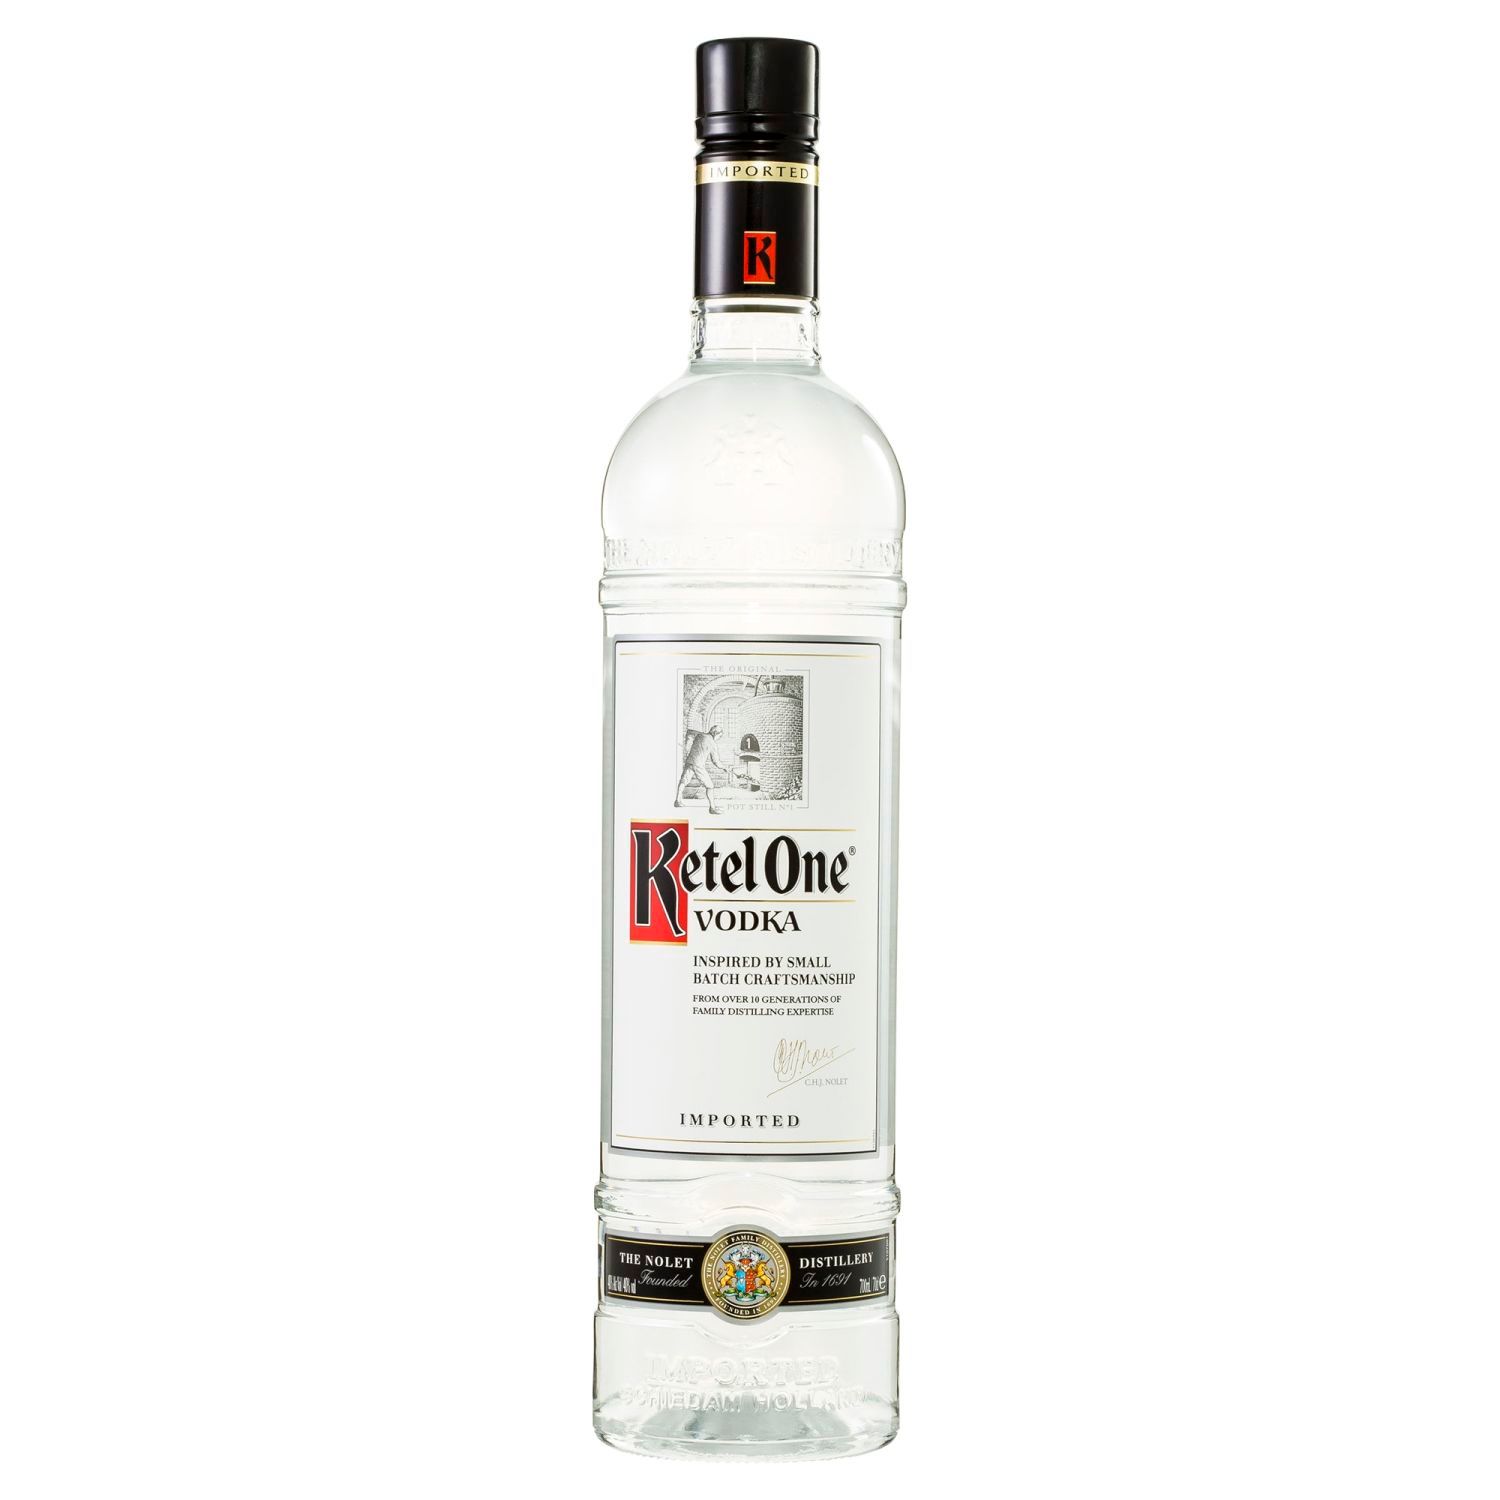 With a crisp, clean flavour and long finish, it’s unsurprising Ketel One is recommended by the world’s most expert bartenders.<br /> <br />Alcohol Volume: 40.00%<br /><br />Pack Format: Bottle<br /><br />Standard Drinks: 23</br /><br />Pack Type: Bottle<br /><br />Country of Origin: Netherlands<br />